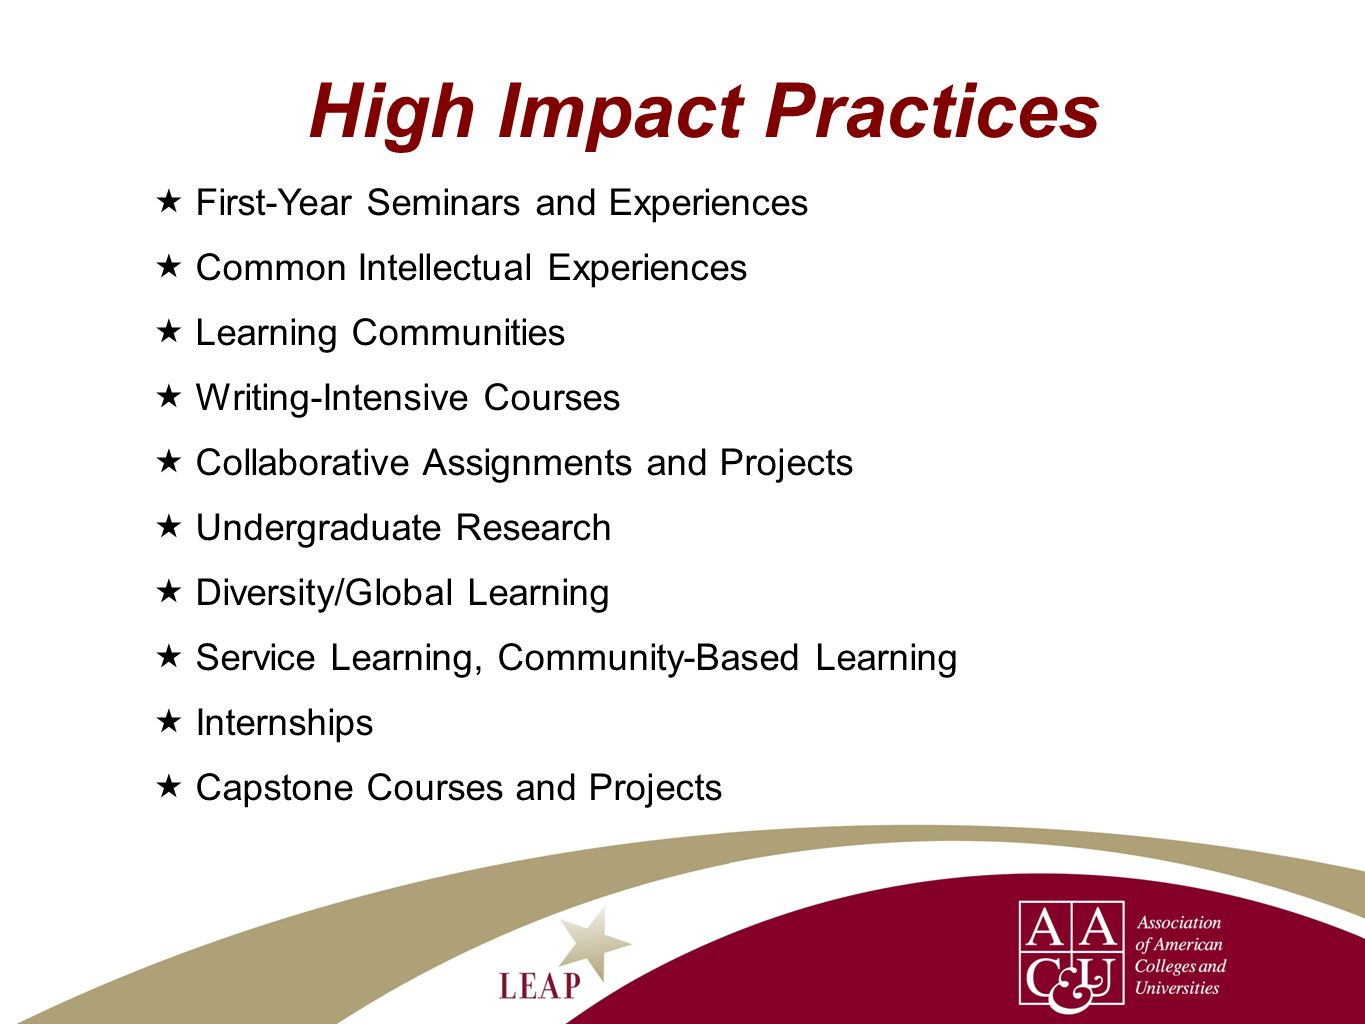 High Impact Practices First-Year Seminars and Experiences Common Intellectual Experiences Learning Communities Writing-Intensive Courses Collaborative Assignments and Projects Undergraduate Research Diversity/Global Learning Service Learning, Community-Based Learning Internships Capstone Courses and Projects